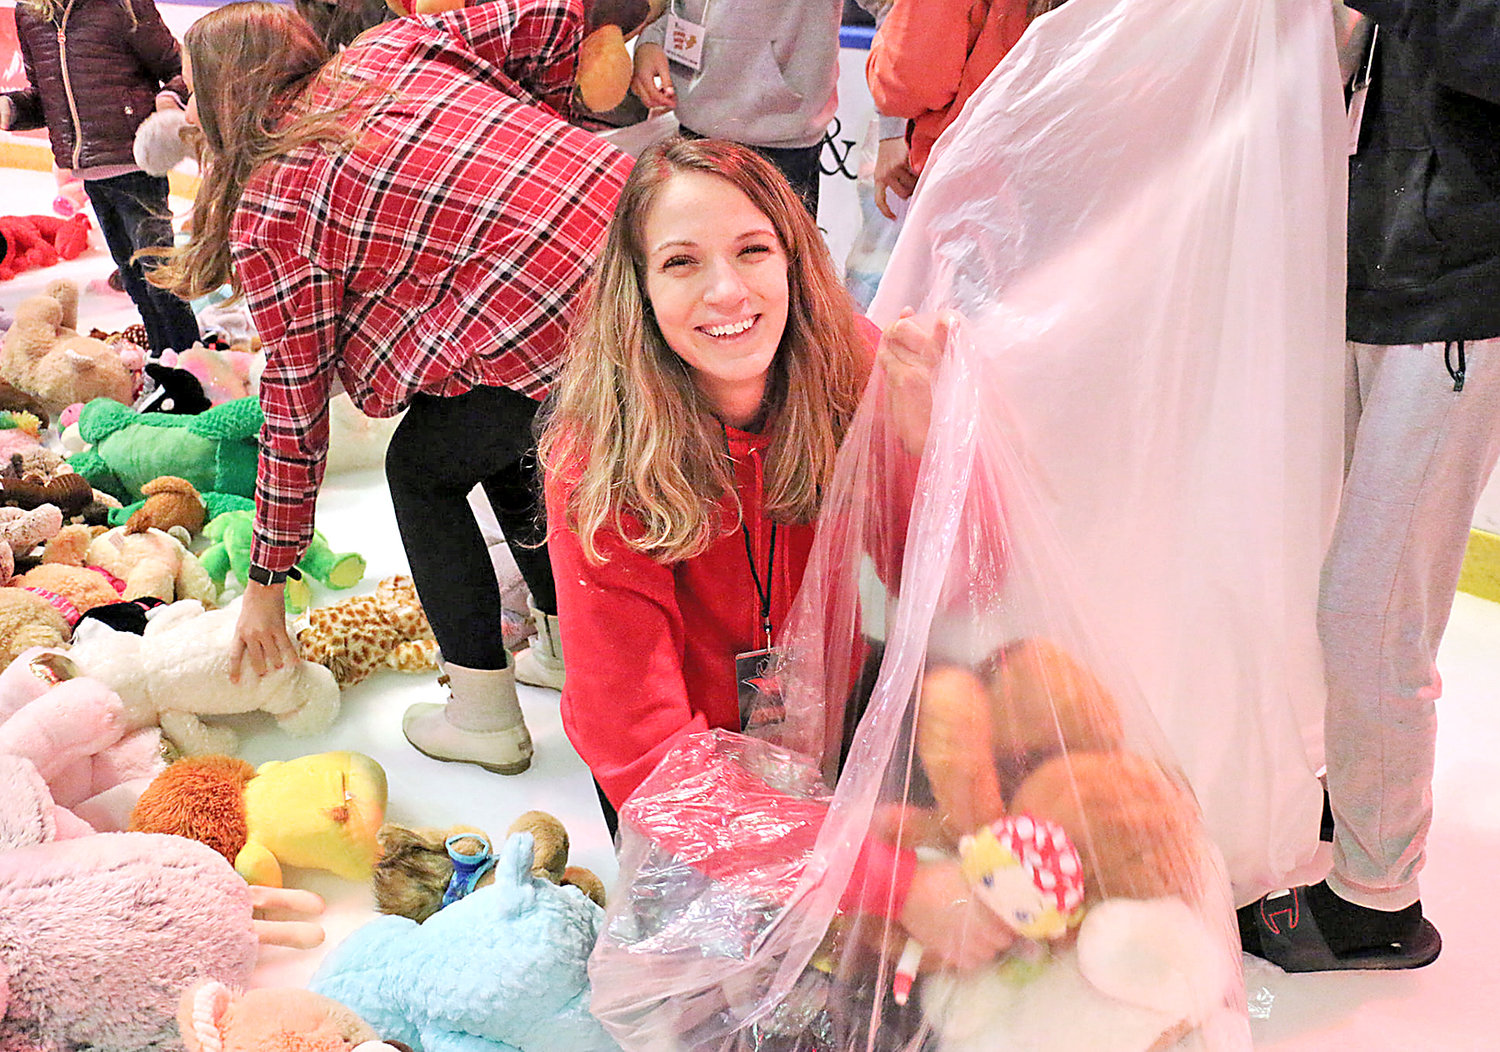 Teddy Bear Toss aids kids in need Daily Sentinel